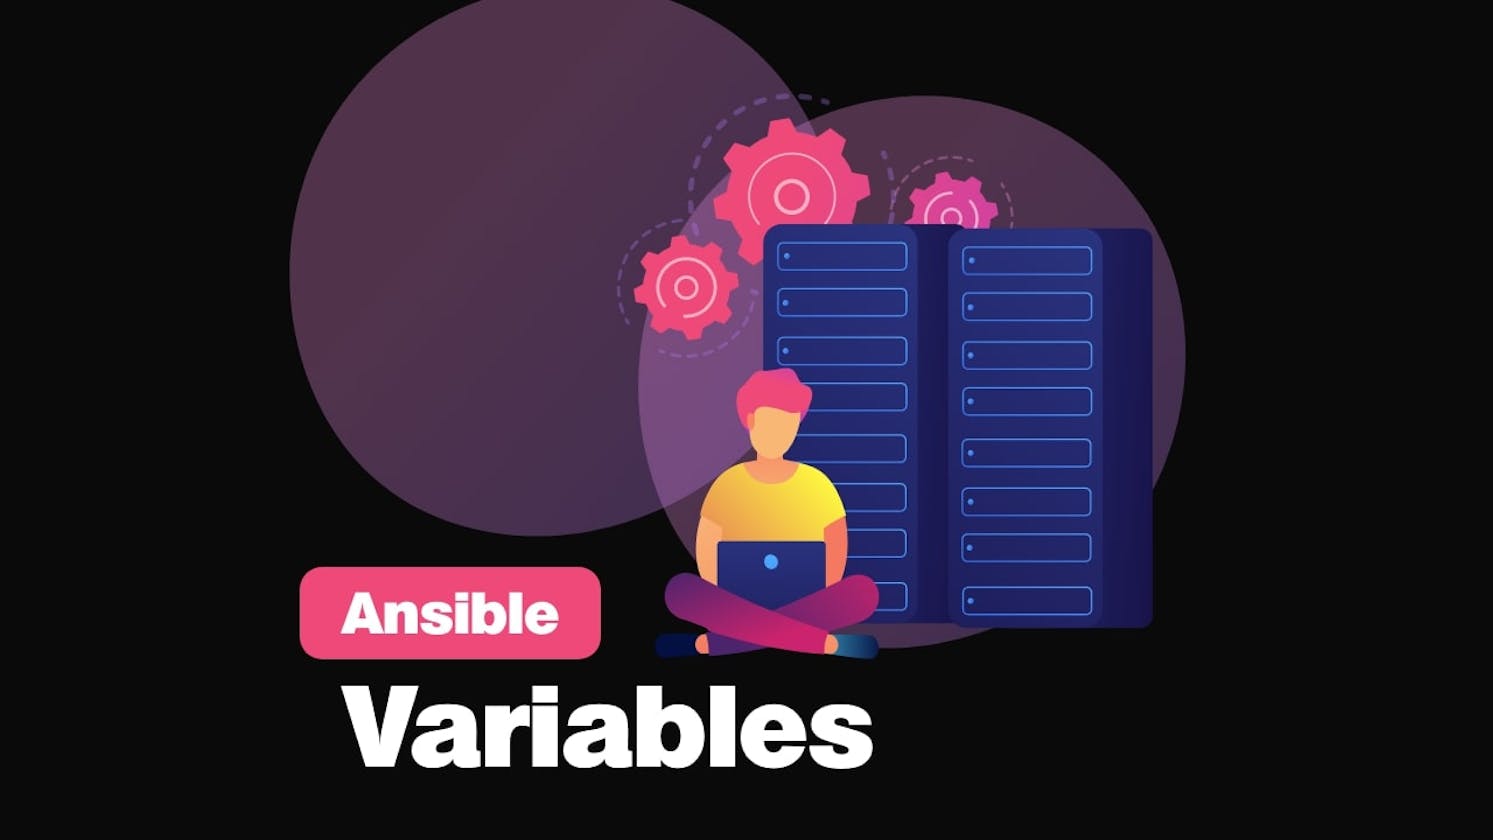 Everything About Ansible Variables